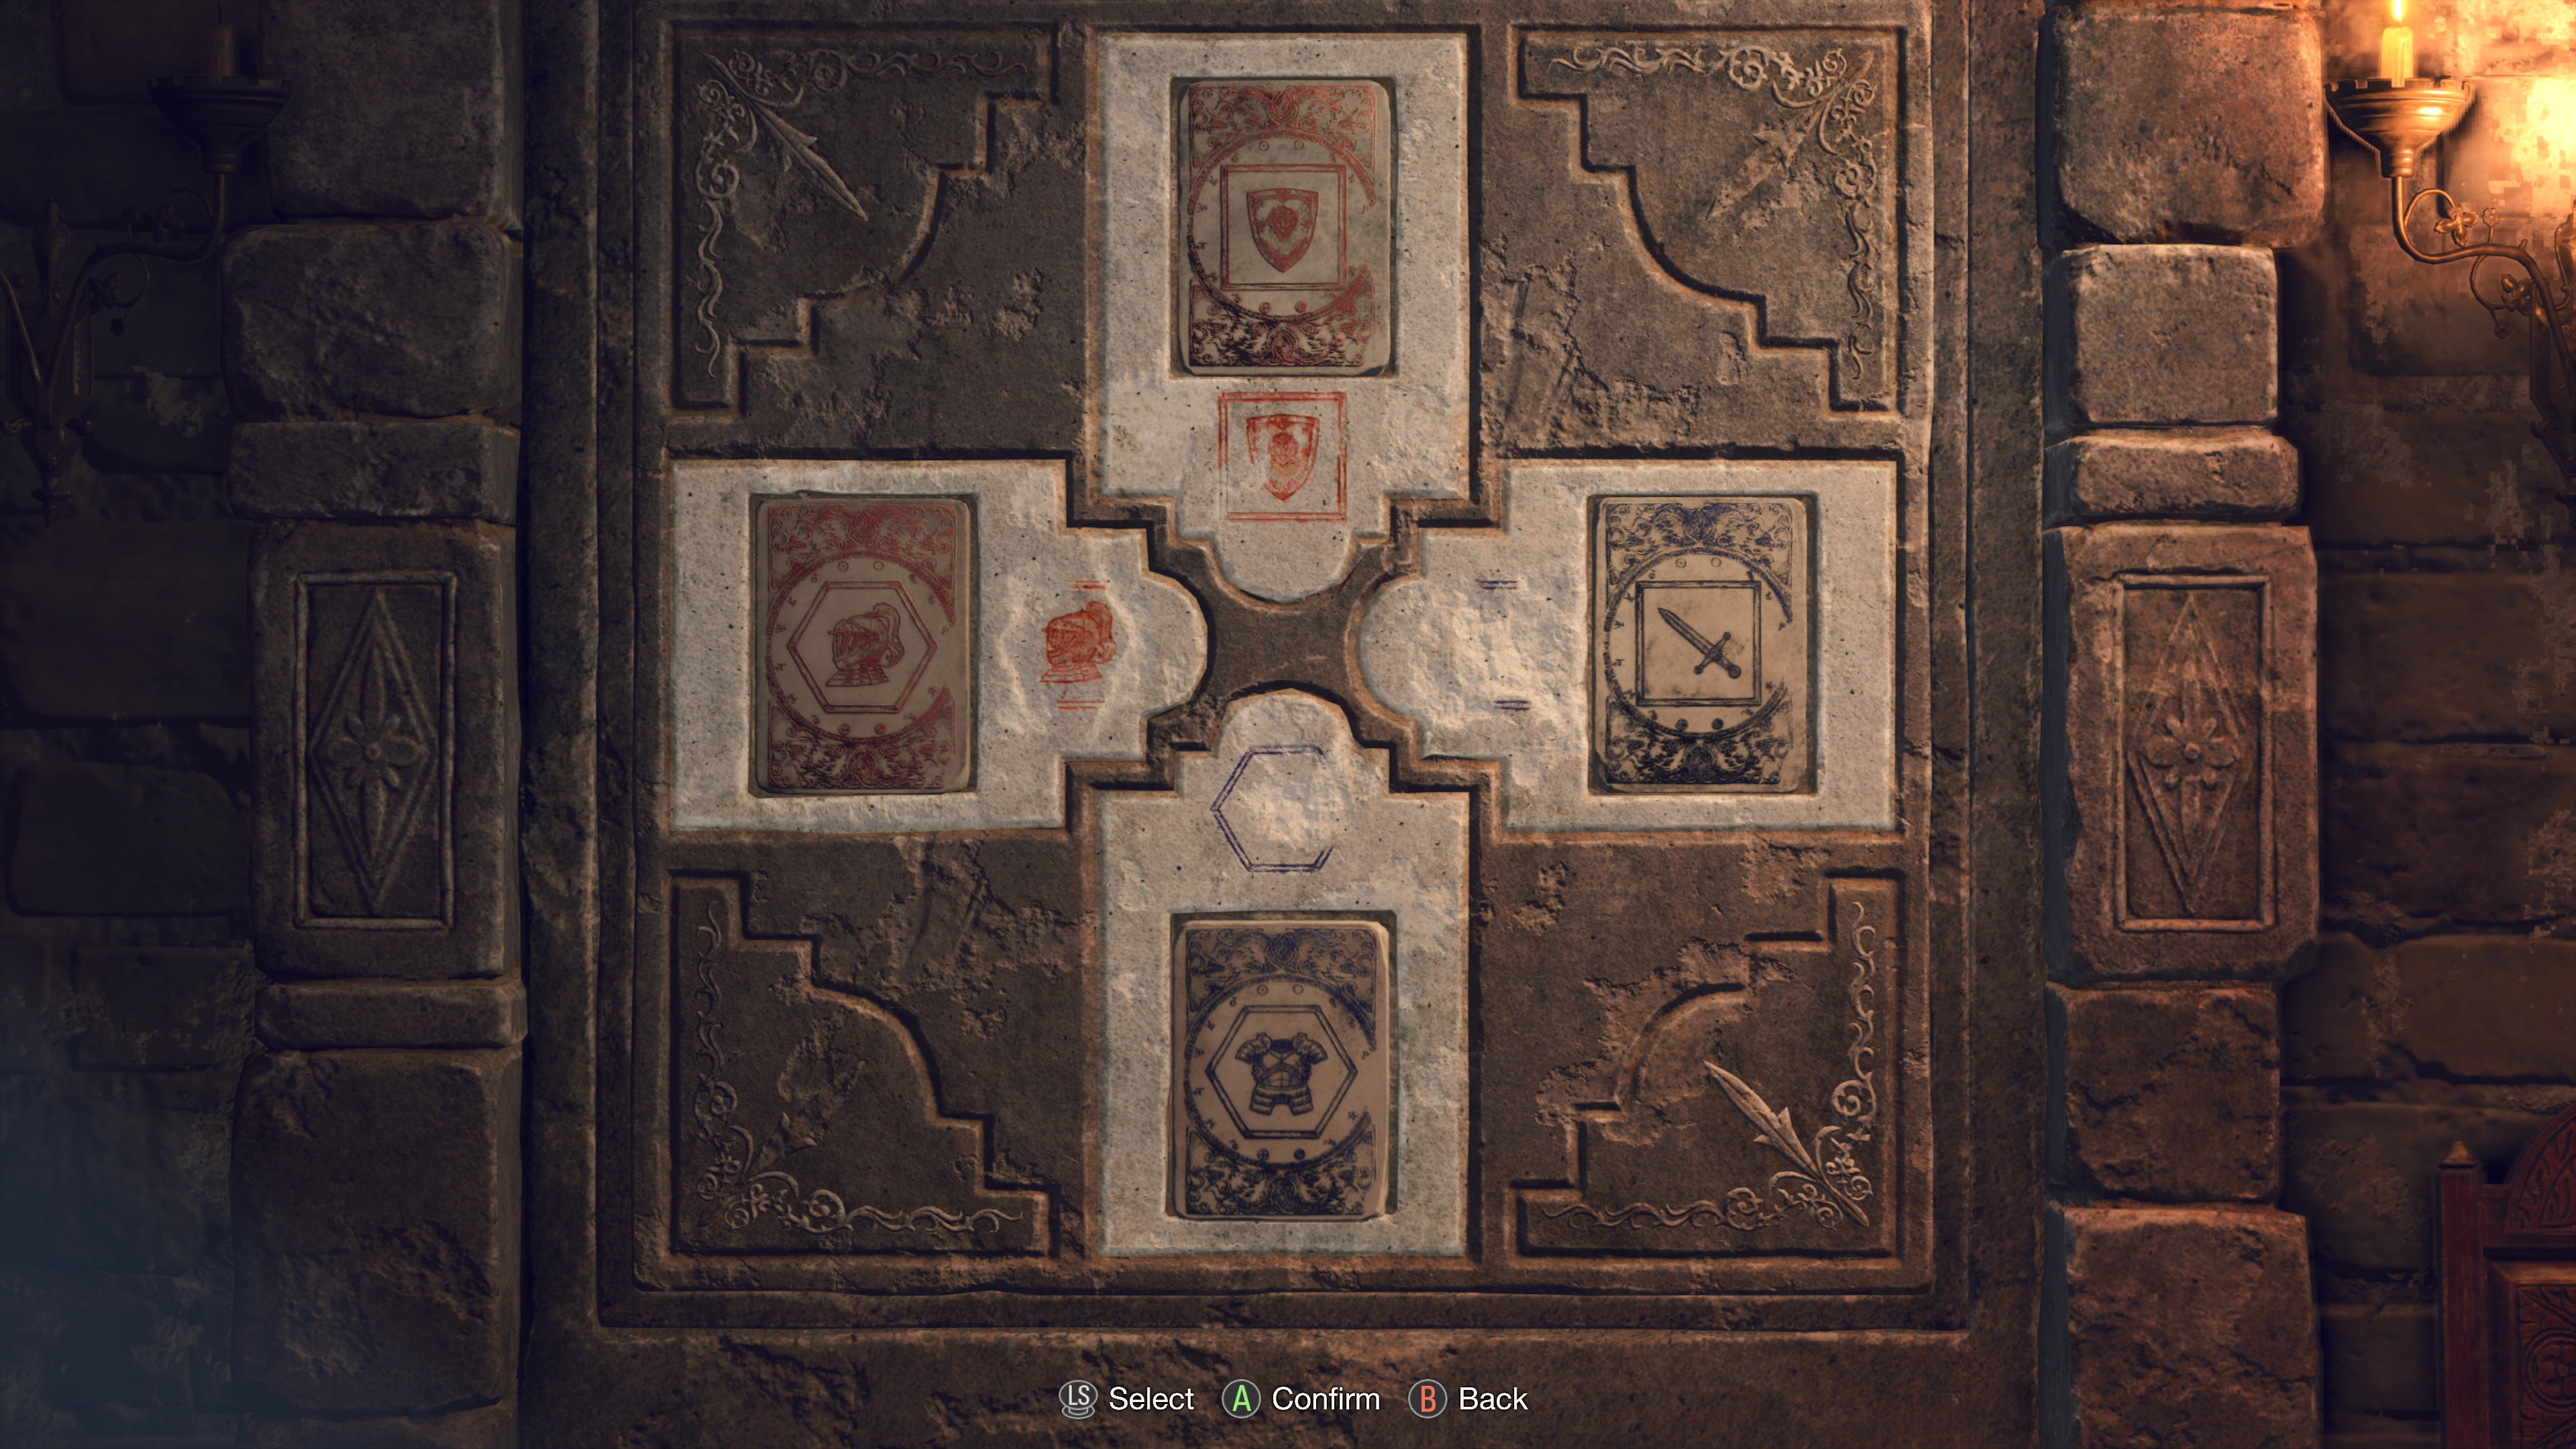 RE4 Separate Ways DLC: How to solve the castle shield puzzle